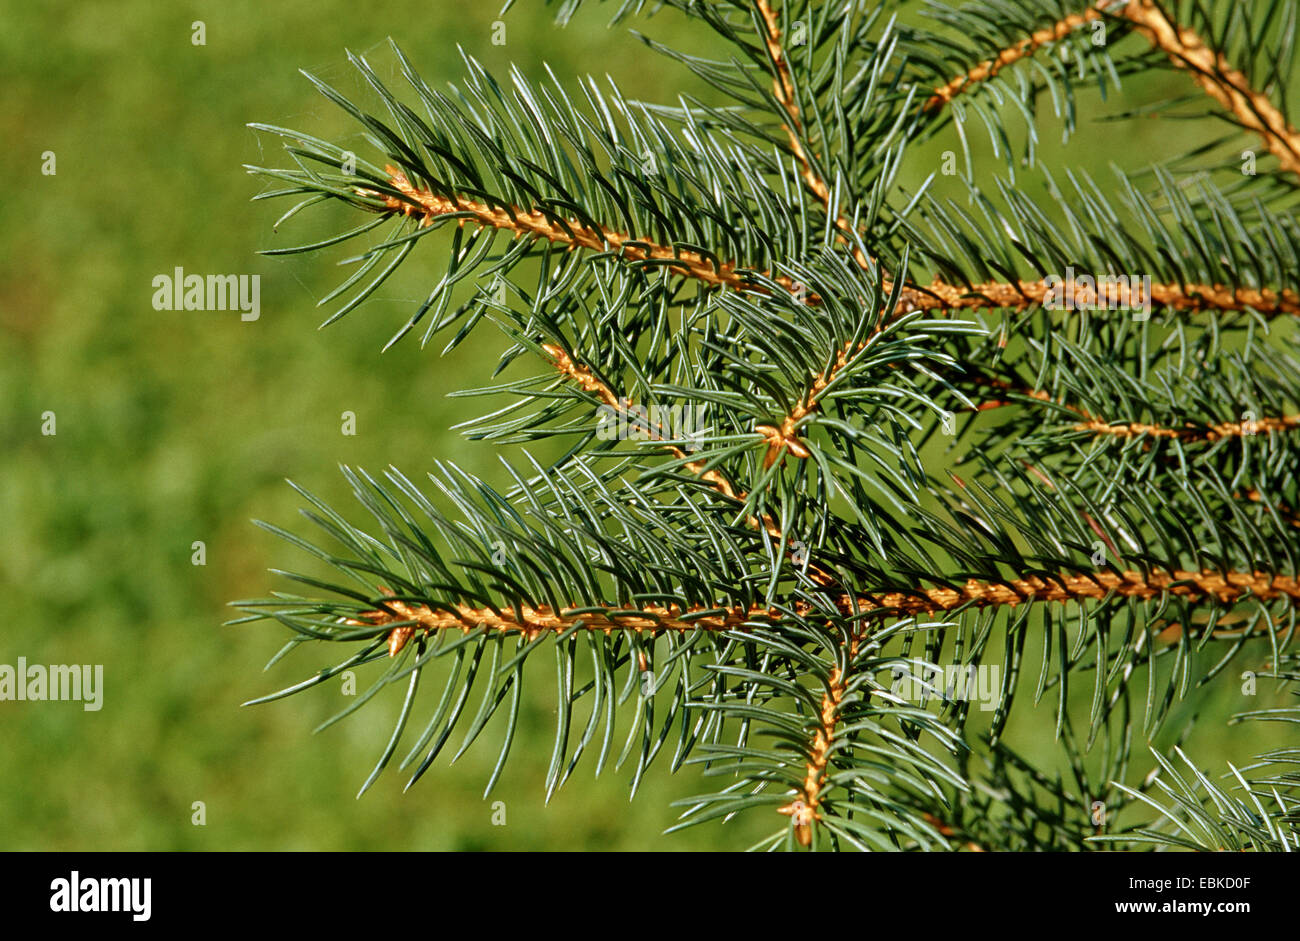 Colorado blue spruce (Picea pungens), branches Stock Photo